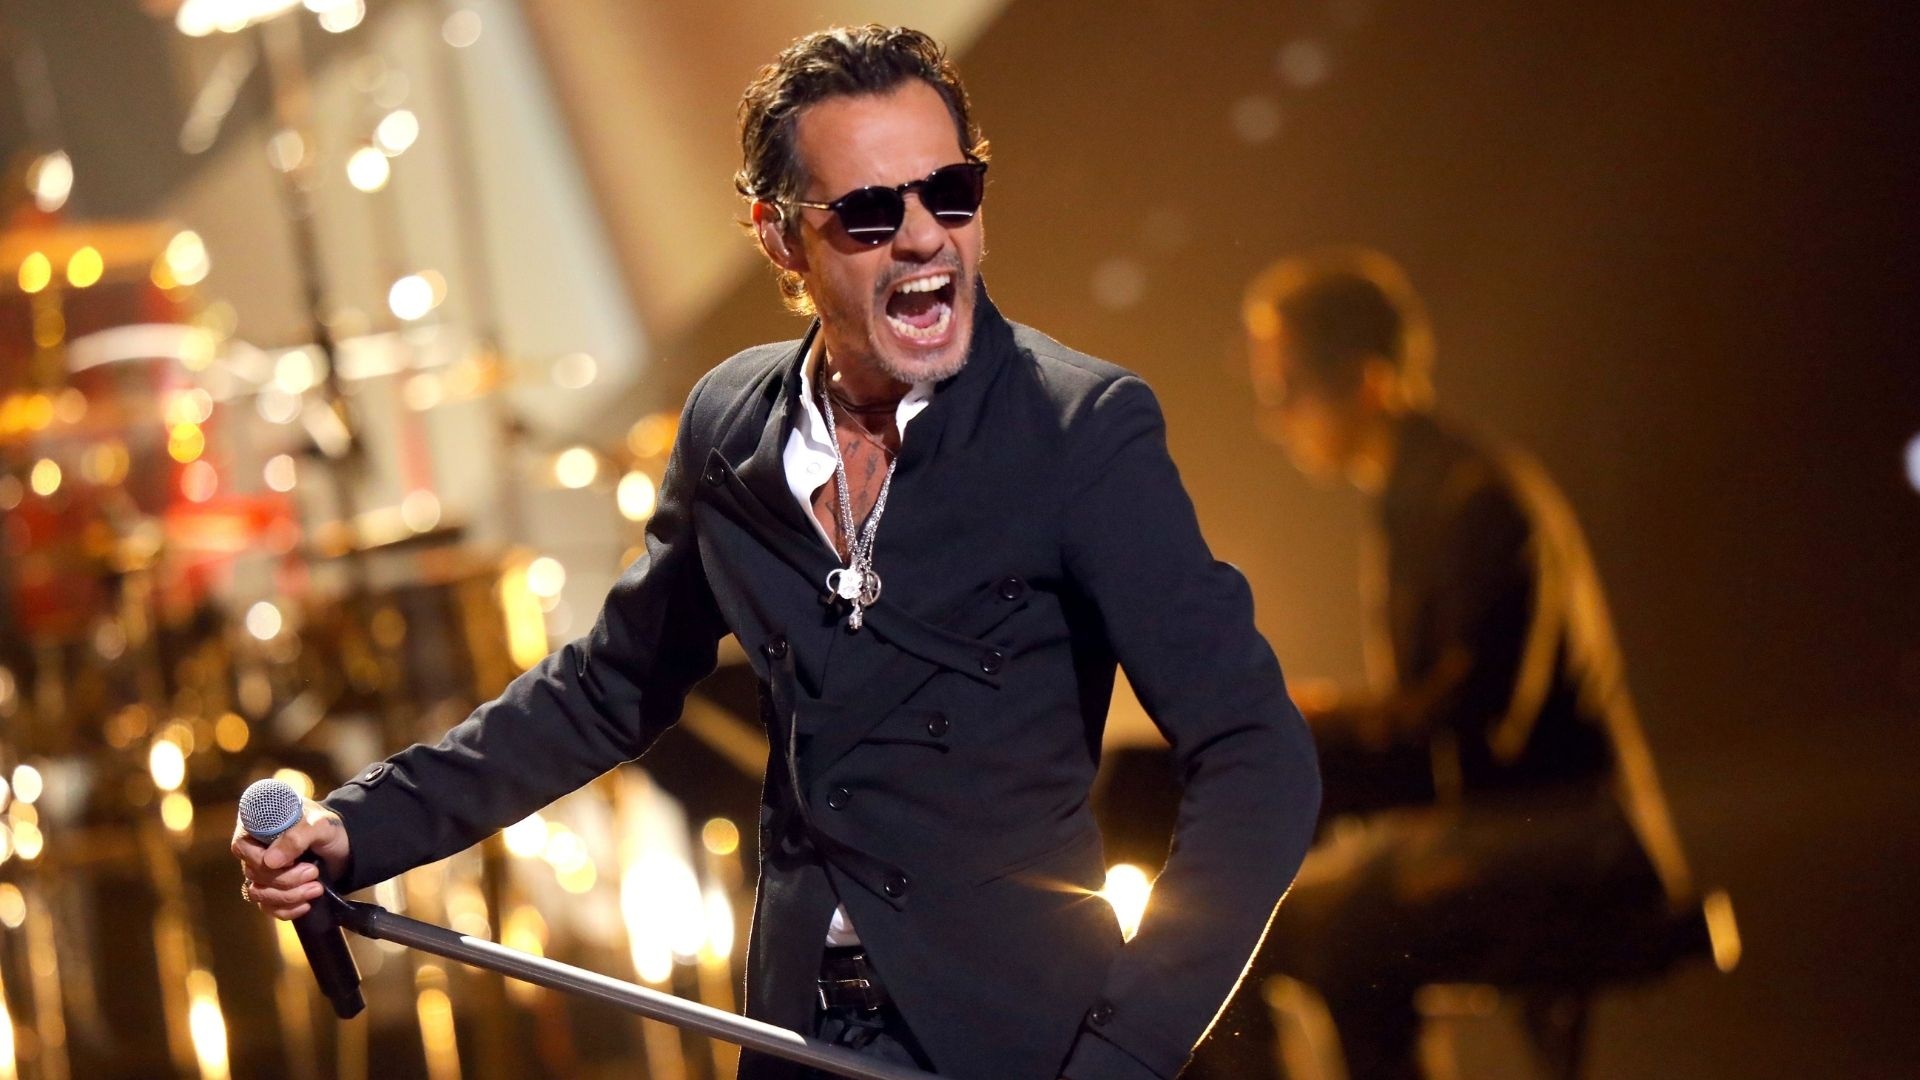 Marc Anthony, Marc anthony reapareci, Accidente que tuvo, Marc anthony, 1920x1080 Full HD Desktop